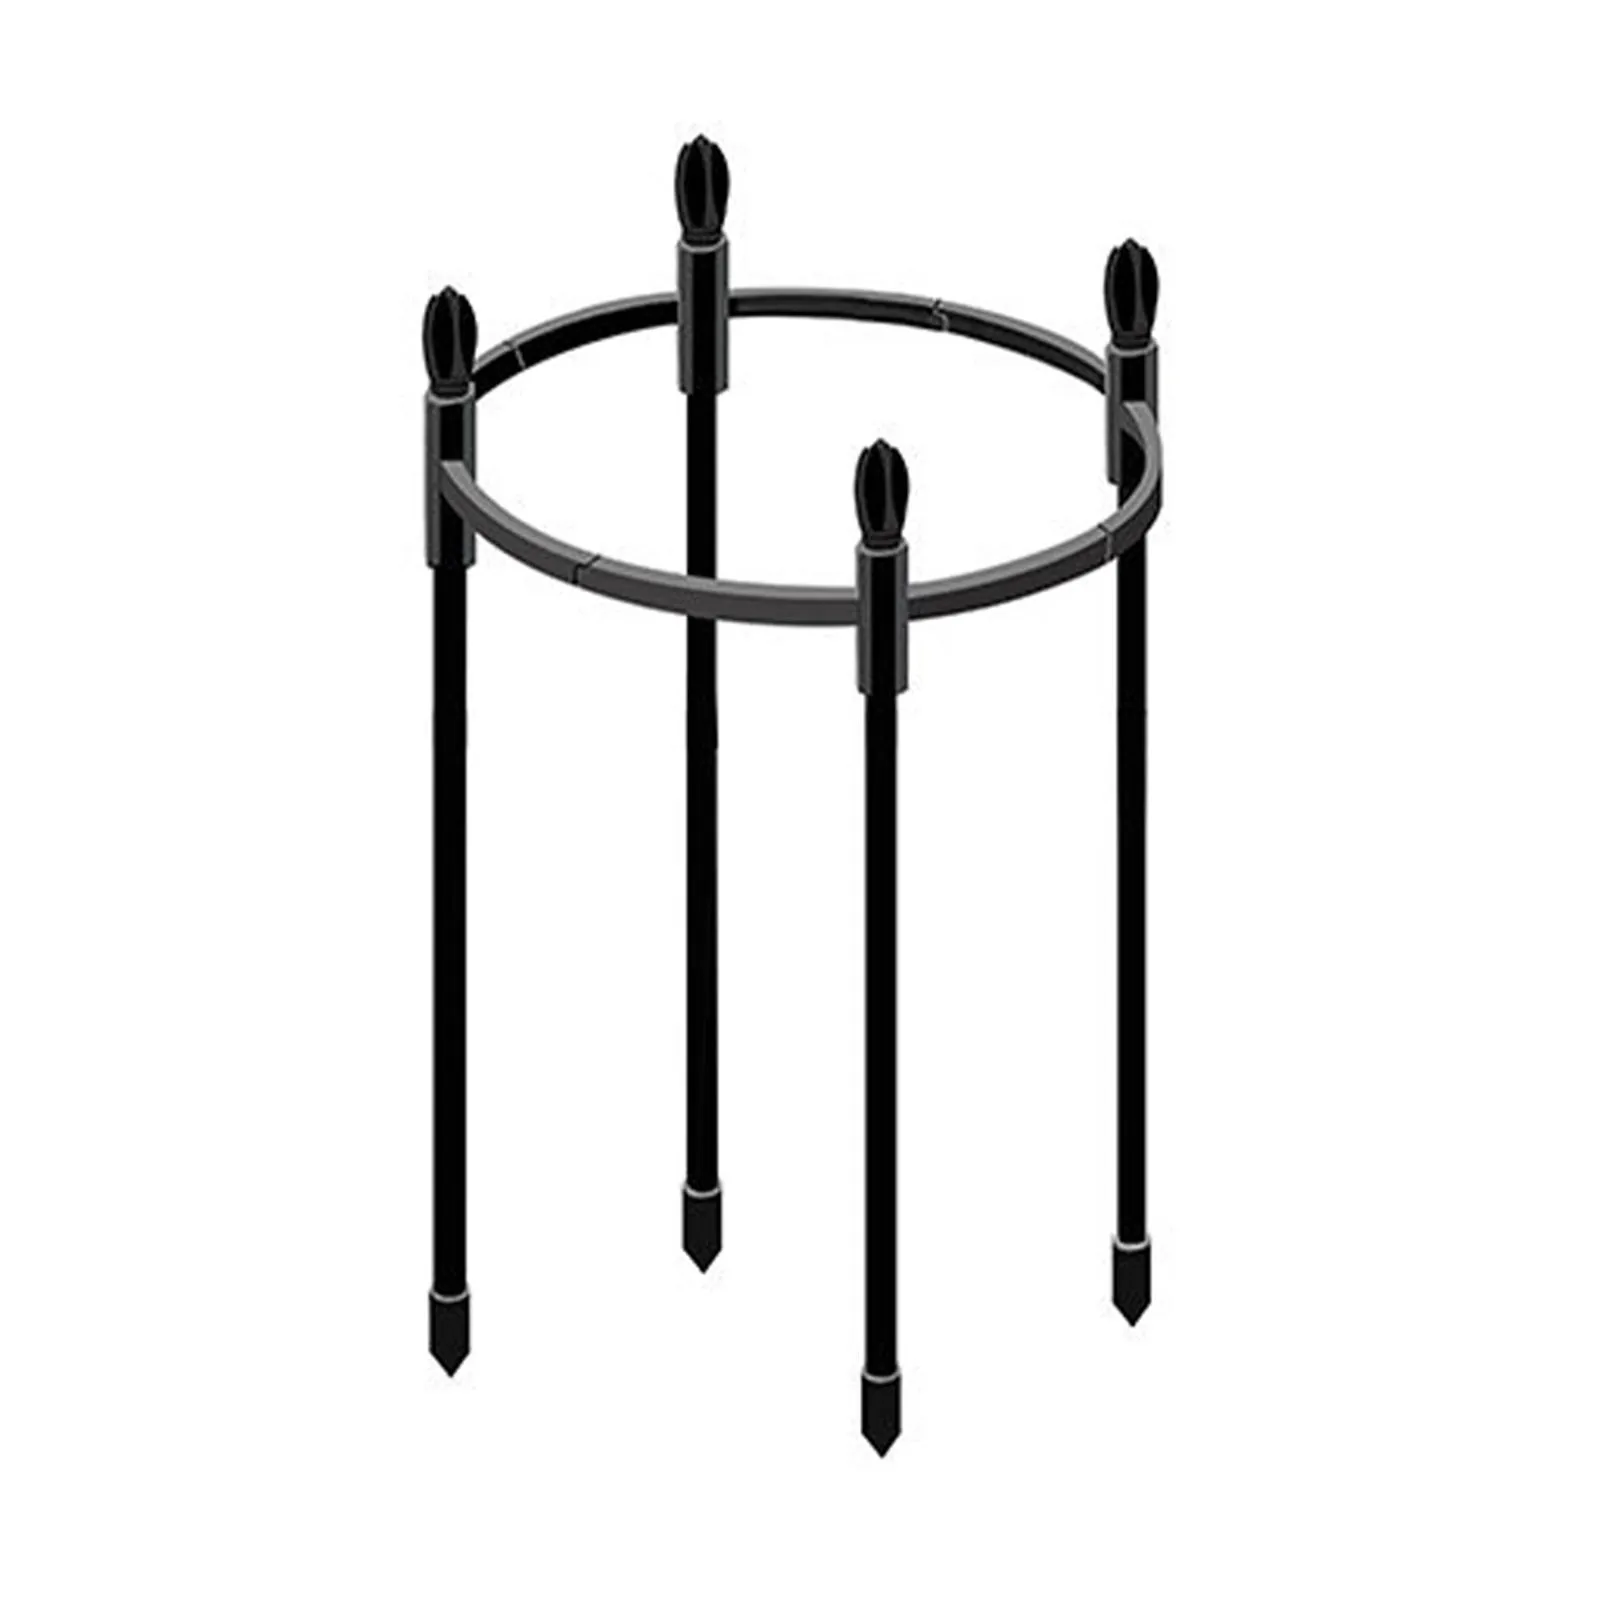 

Plant Growth Supports Cages Round Tomato Cage Climbing Plant Stakes Garden Trellis In Diameter Of 20cm PVC Outdoor Black Plant